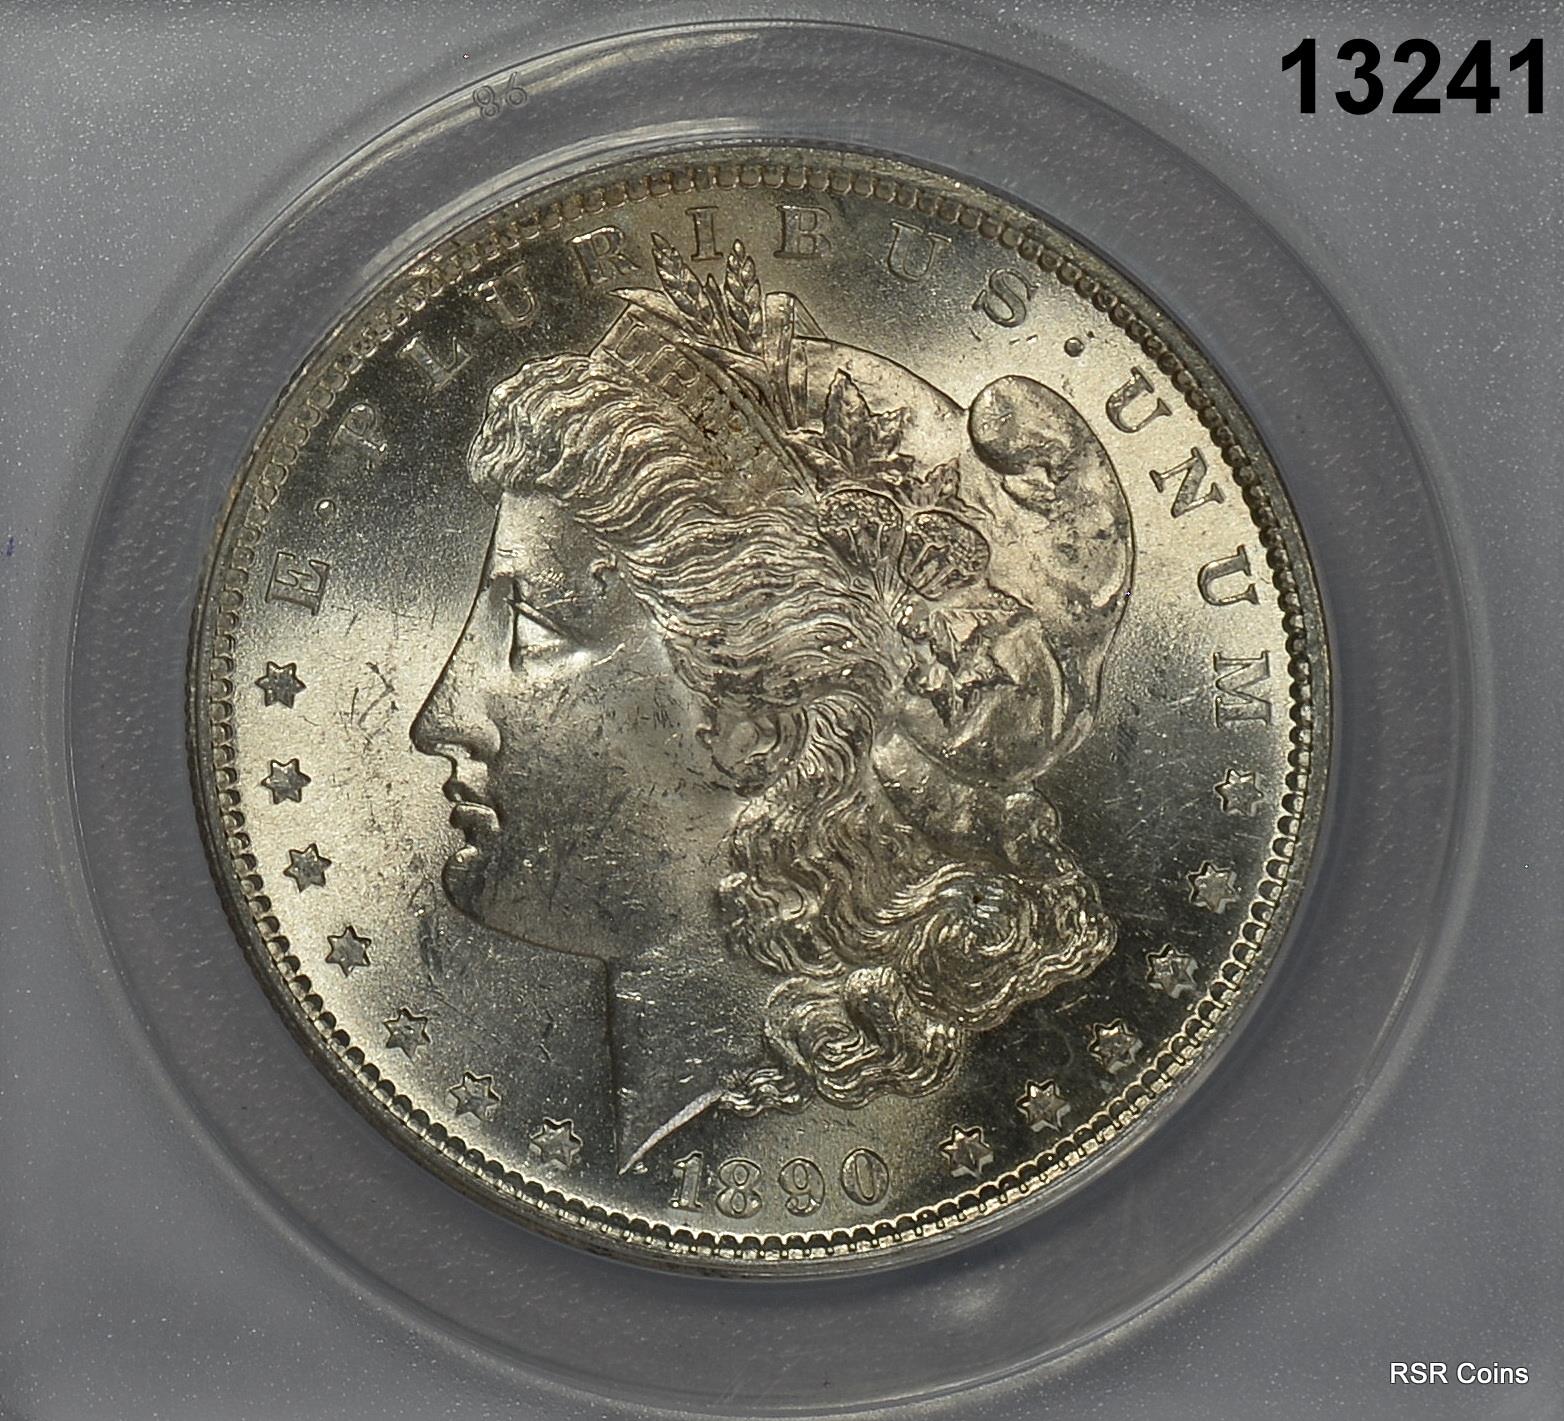 1890 S MORGAN SILVER DOLLAR ANACS CERTIFED MS62 LOOKS BETTER! WOW! #13241